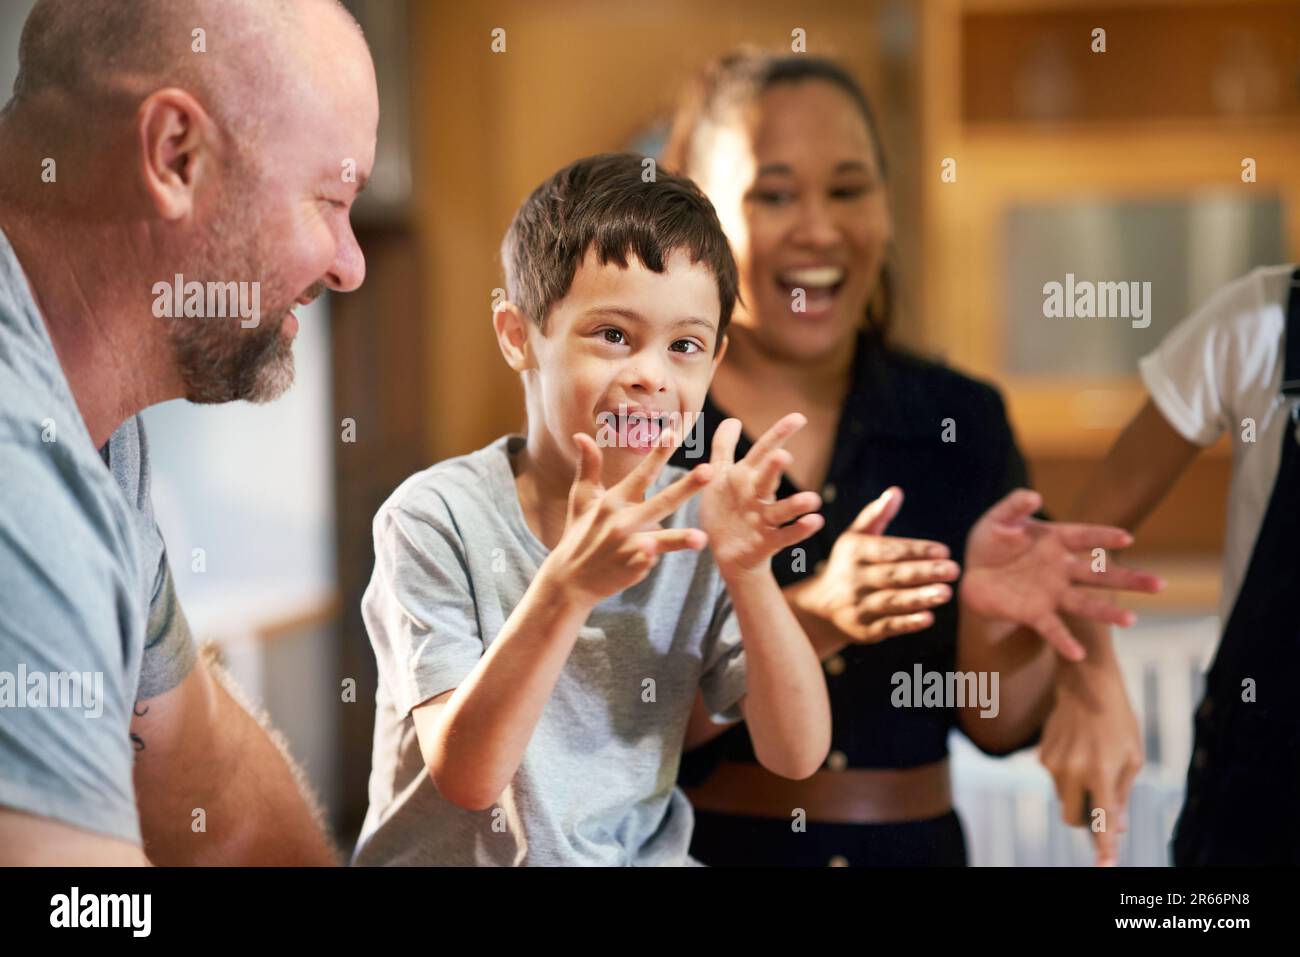 Portrait happy boy with Down Syndrome clapping with family Stock Photo